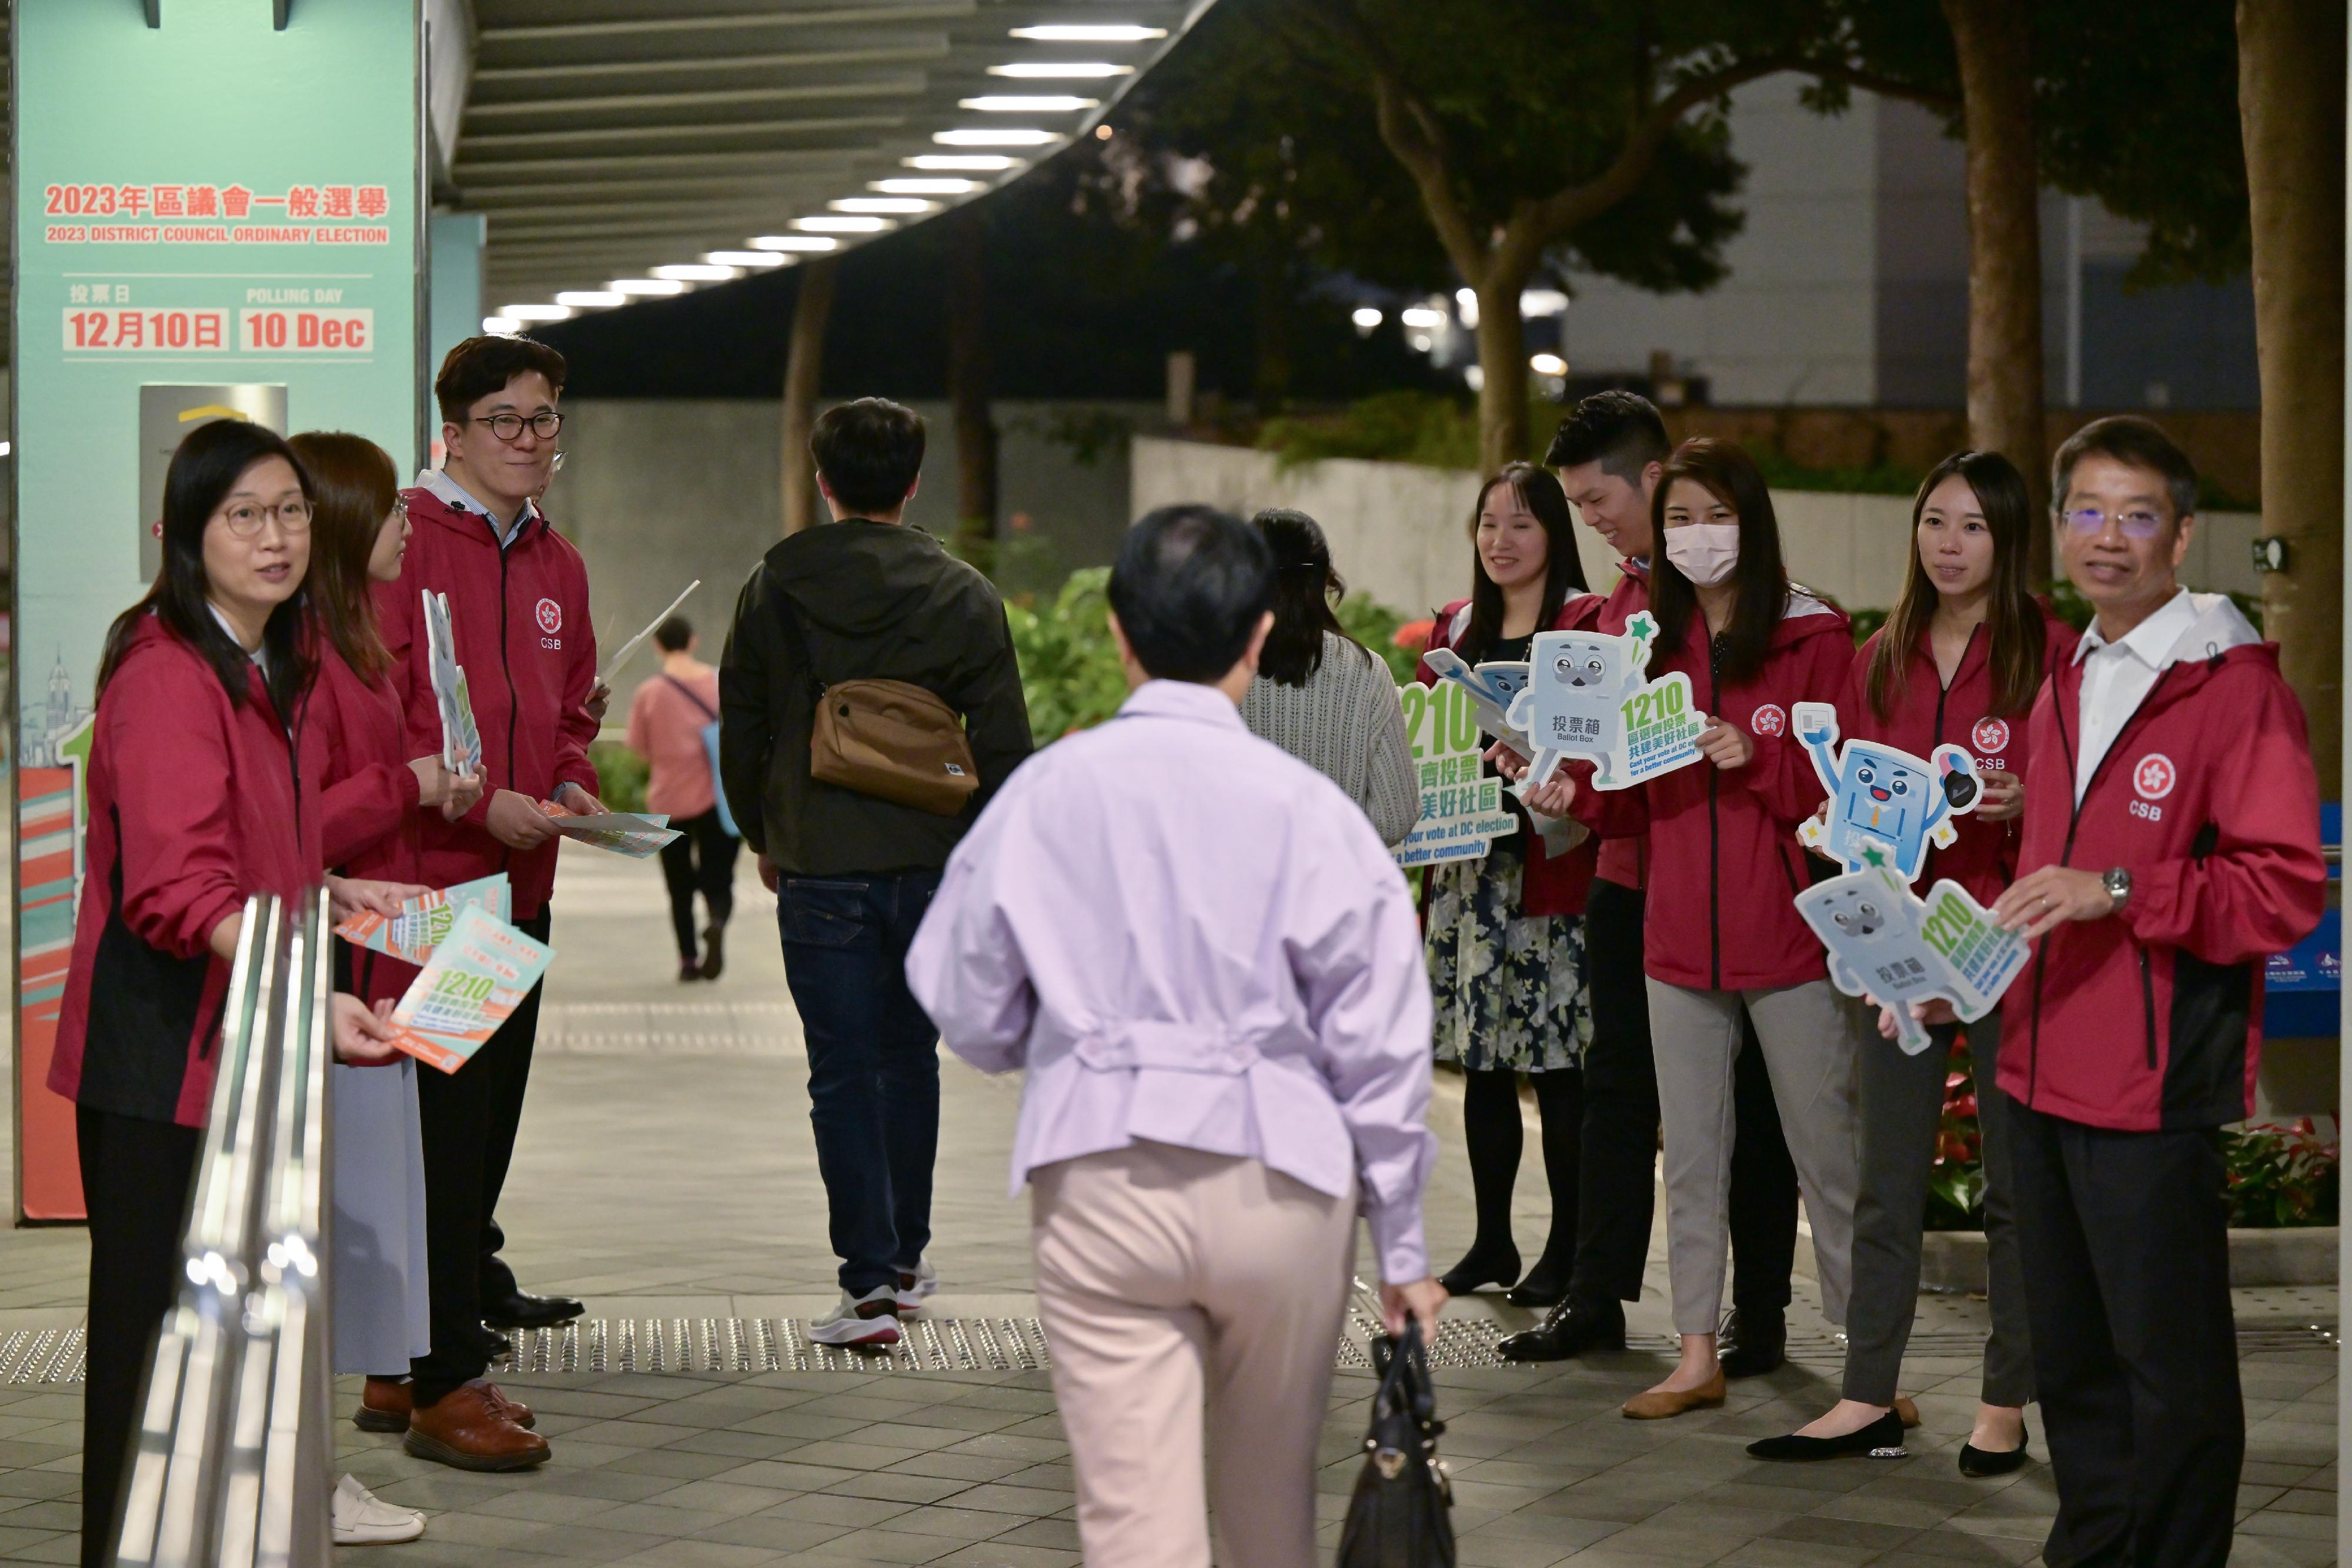 The Civil Service Bureau Volunteer Team, led by the Secretary for the Civil Service, Mrs Ingrid Yeung, distributed leaflets to civil servants at the walkways and footbridge outside the Central Government Offices at Tamar as they finished work this evening (November 20), to further disseminate the message of casting one's vote at the District Council (DC) election. 